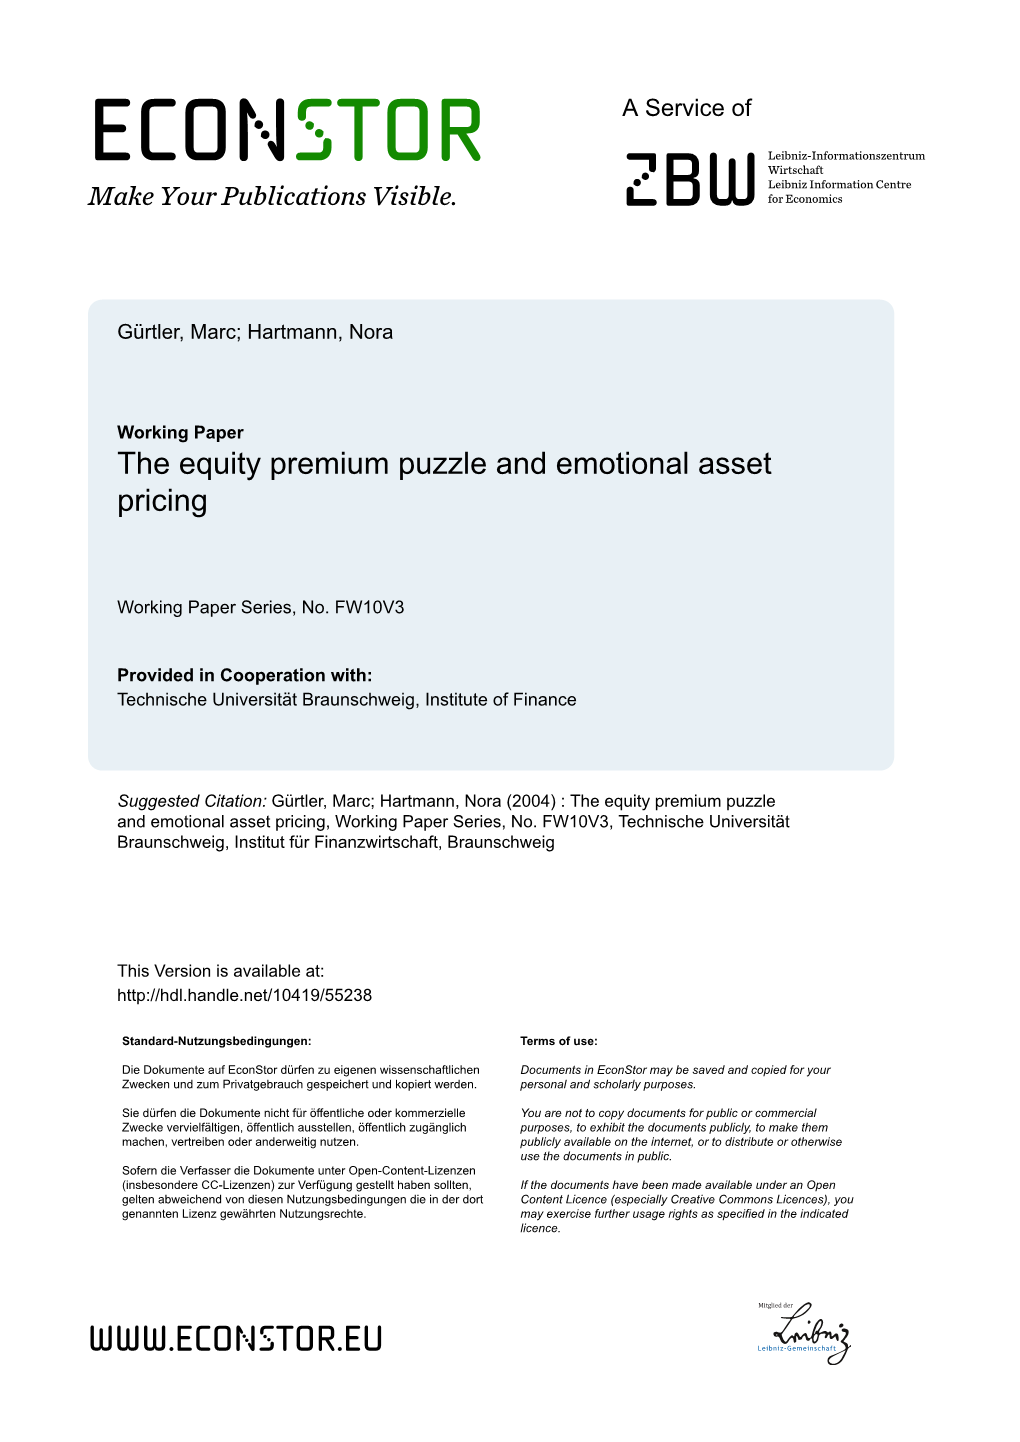 The Equity Premium Puzzle and Emotional Asset Pricing